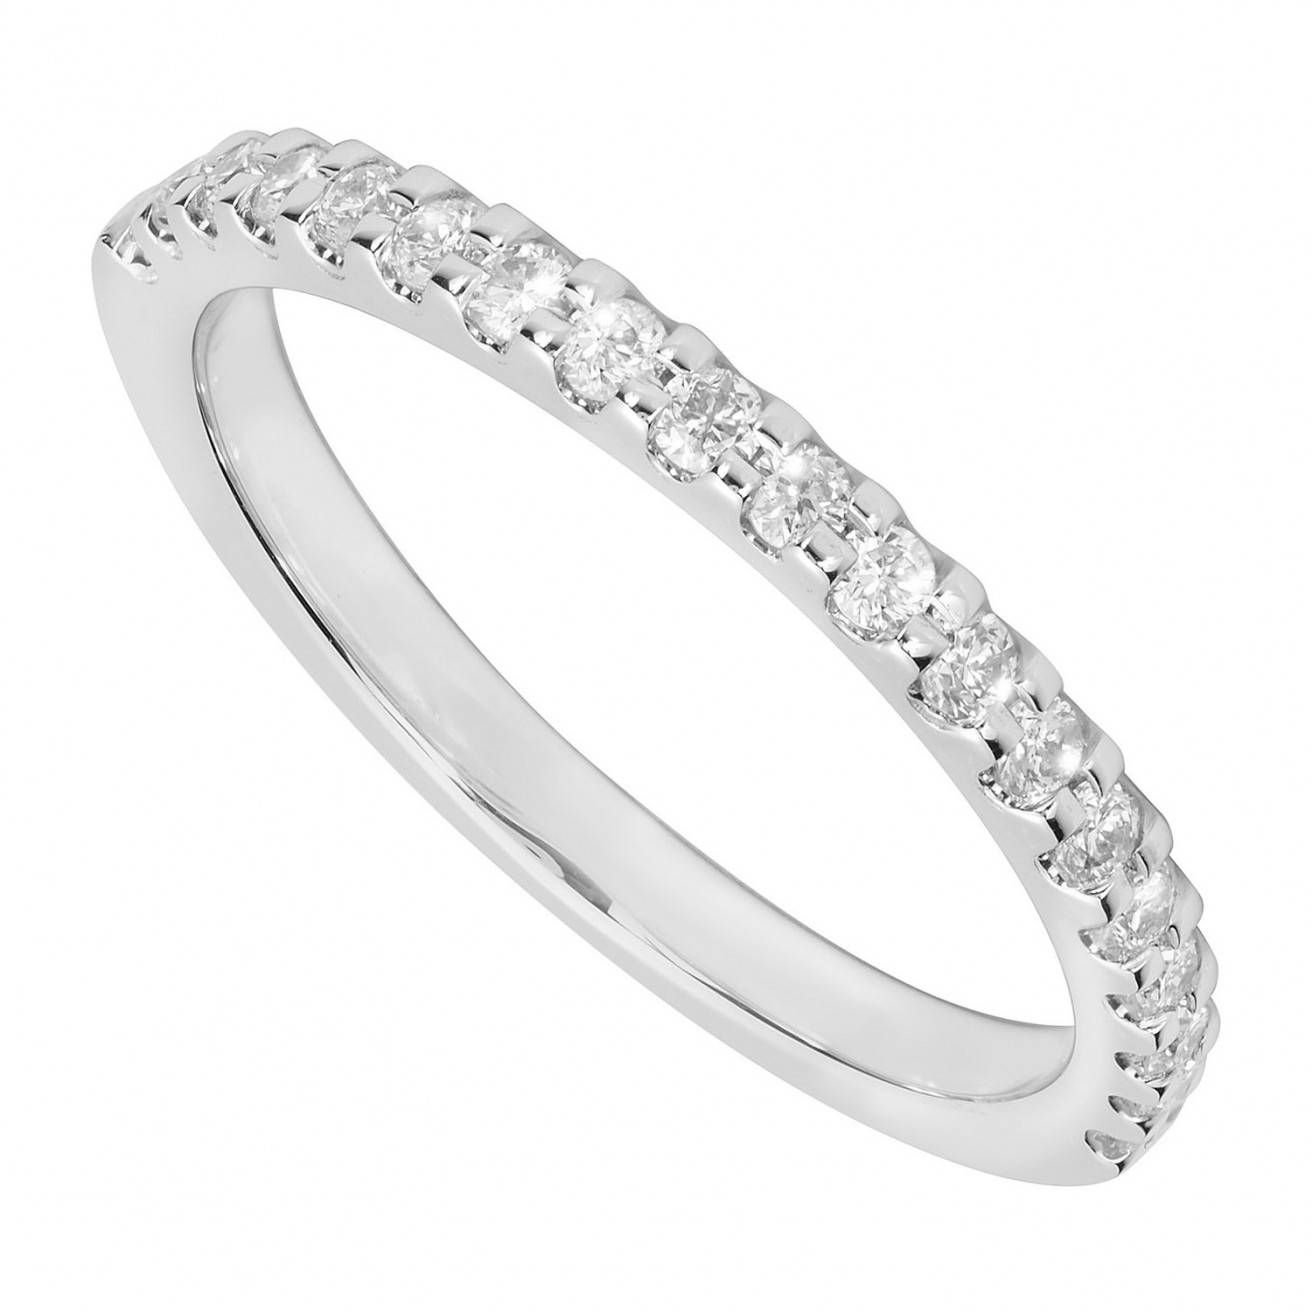 Buy Platinum Wedding Bands Online – Fraser Hart For Wedding Rings With Platinum Diamond (View 1 of 15)